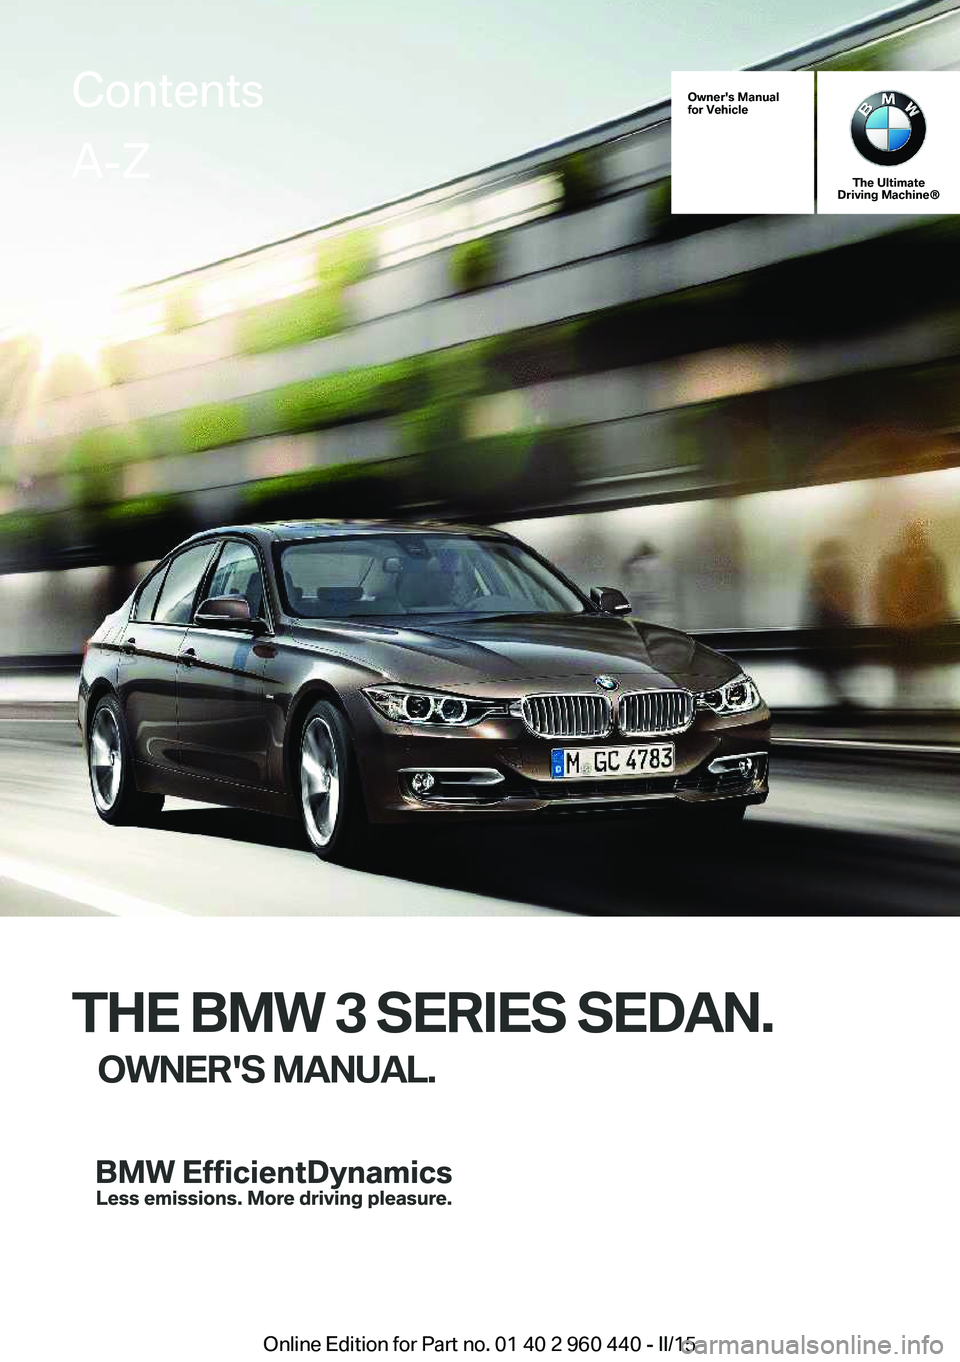 BMW 328I SEDAN 2015  Owners Manual Owner's Manual
for Vehicle
The Ultimate
Driving Machine®
THE BMW 3 SERIES SEDAN.
OWNER'S MANUAL.
ContentsA-Z
Online Edition for Part no. 01 40 2 960 440 - II/15   